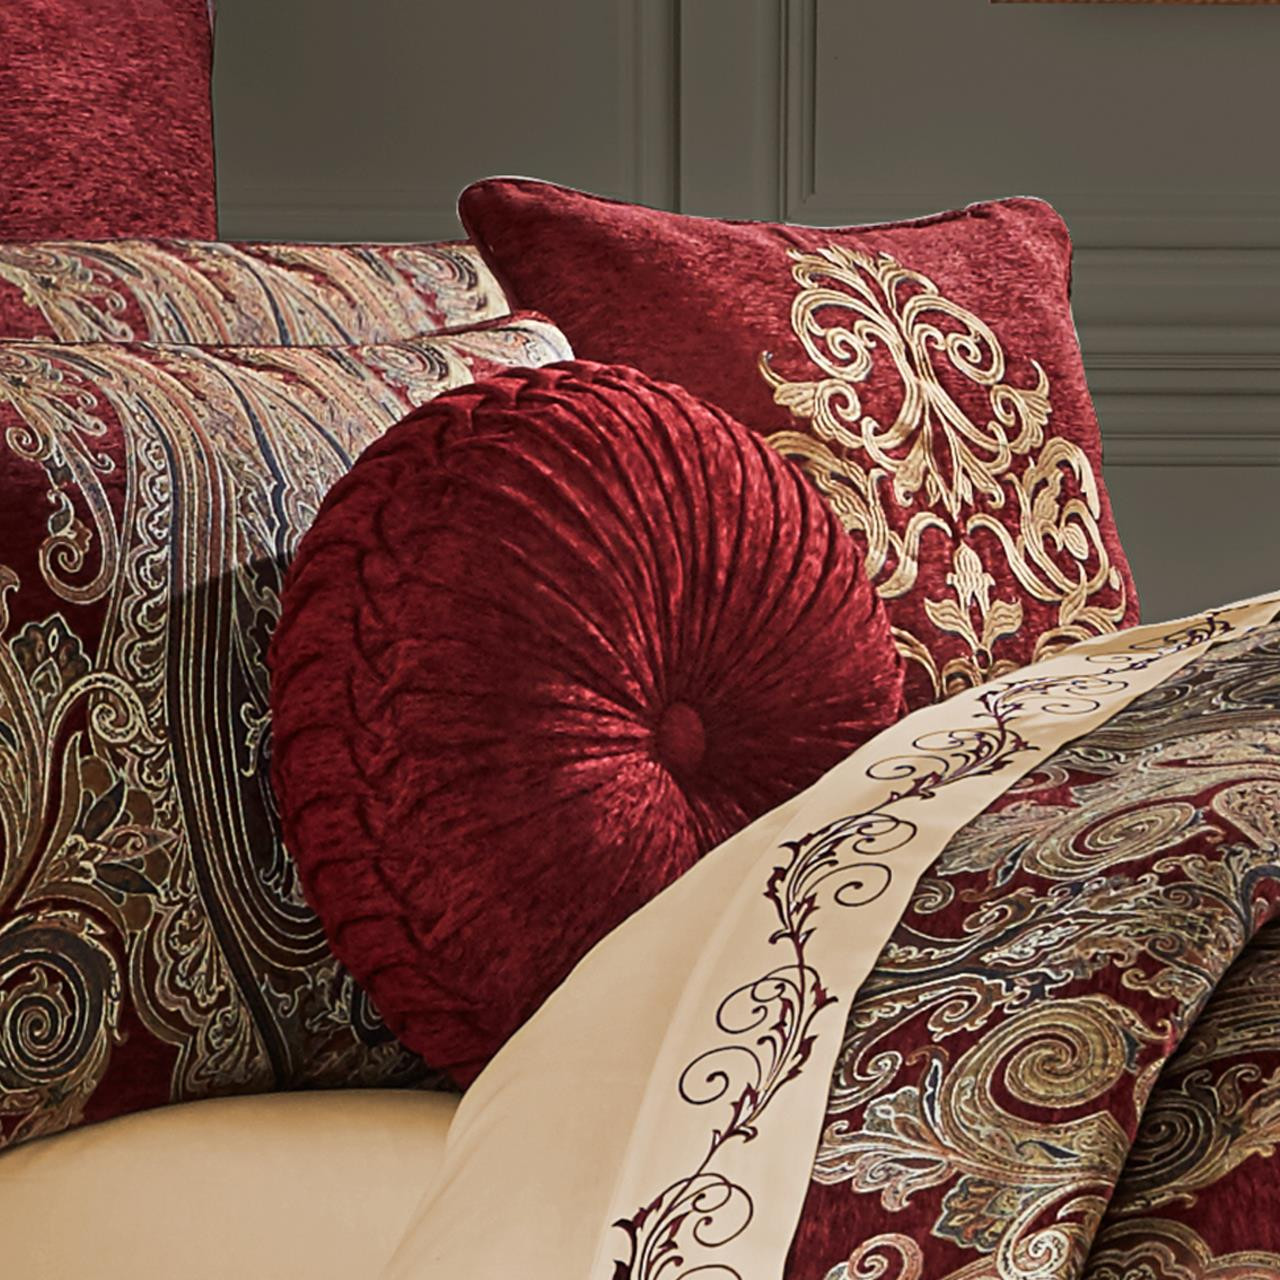 https://cdn10.bigcommerce.com/s-9ese1/products/18360/images/116305/Garnet-Red-Tufted-Round-Pillow-193842111352_image2__71650.1595691493.1280.1280.jpg?c=2